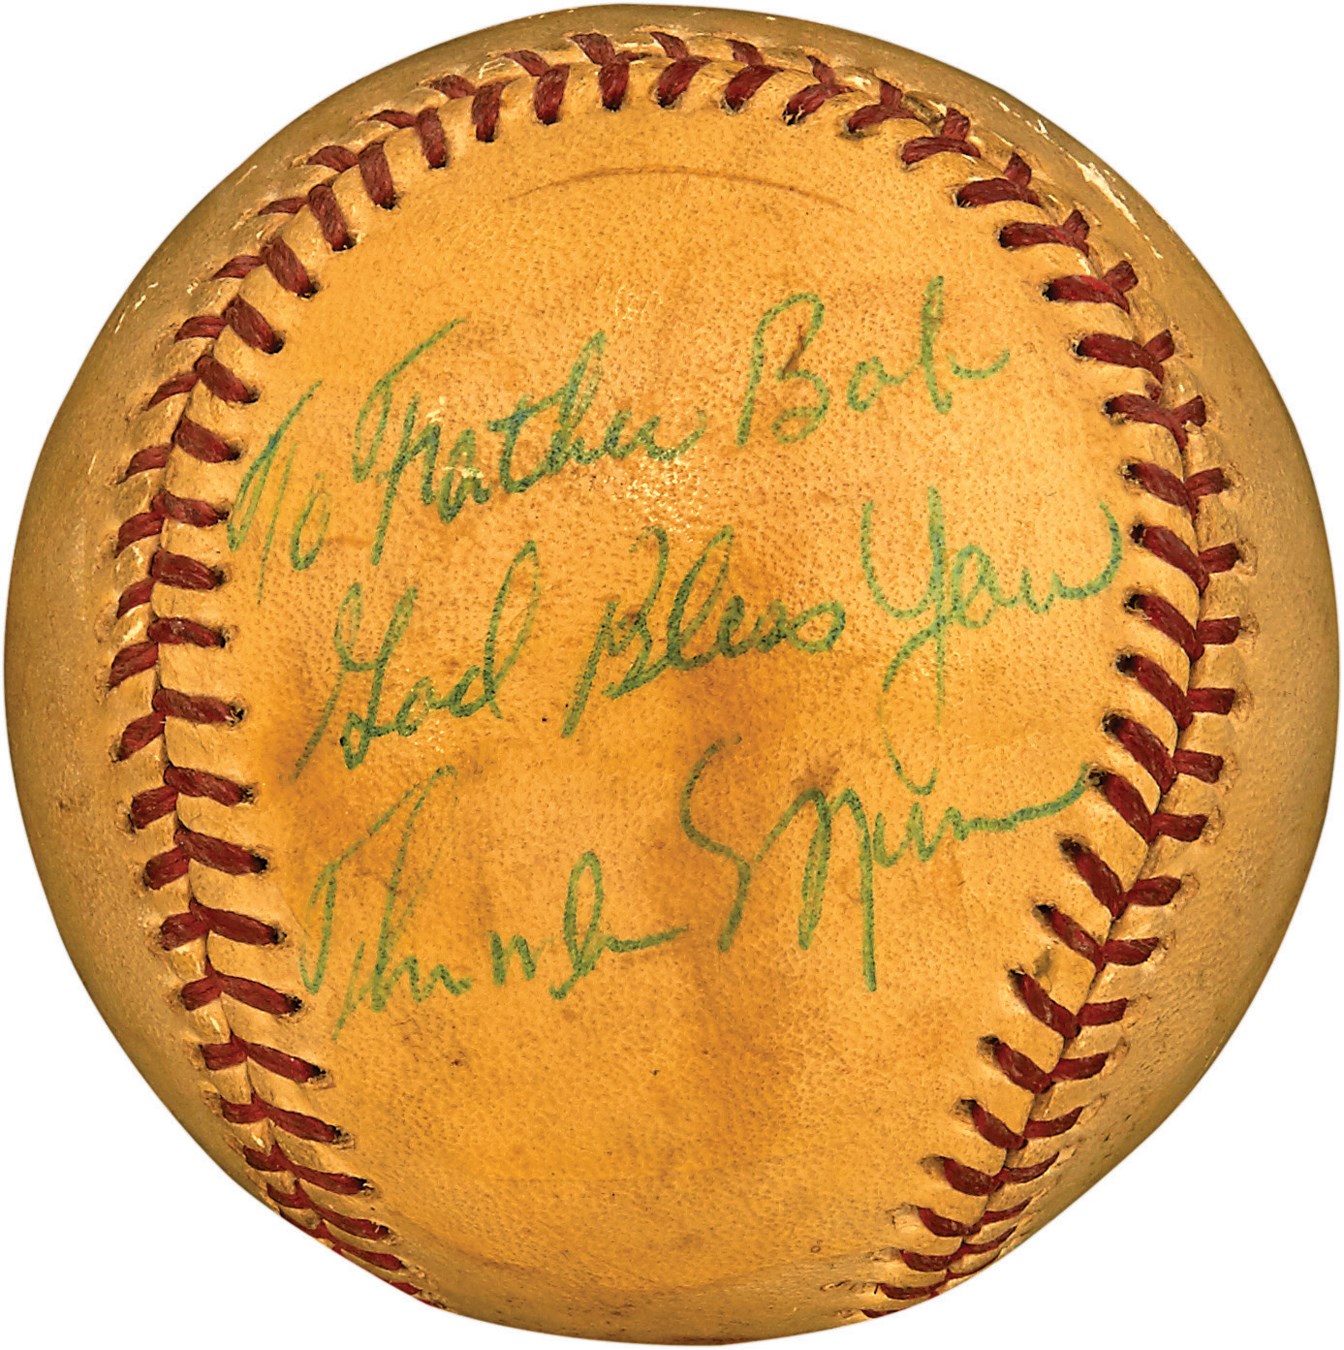 NY Yankees, Giants & Mets - Thurman Munson Signed "God Bless You" Baseball to Priest